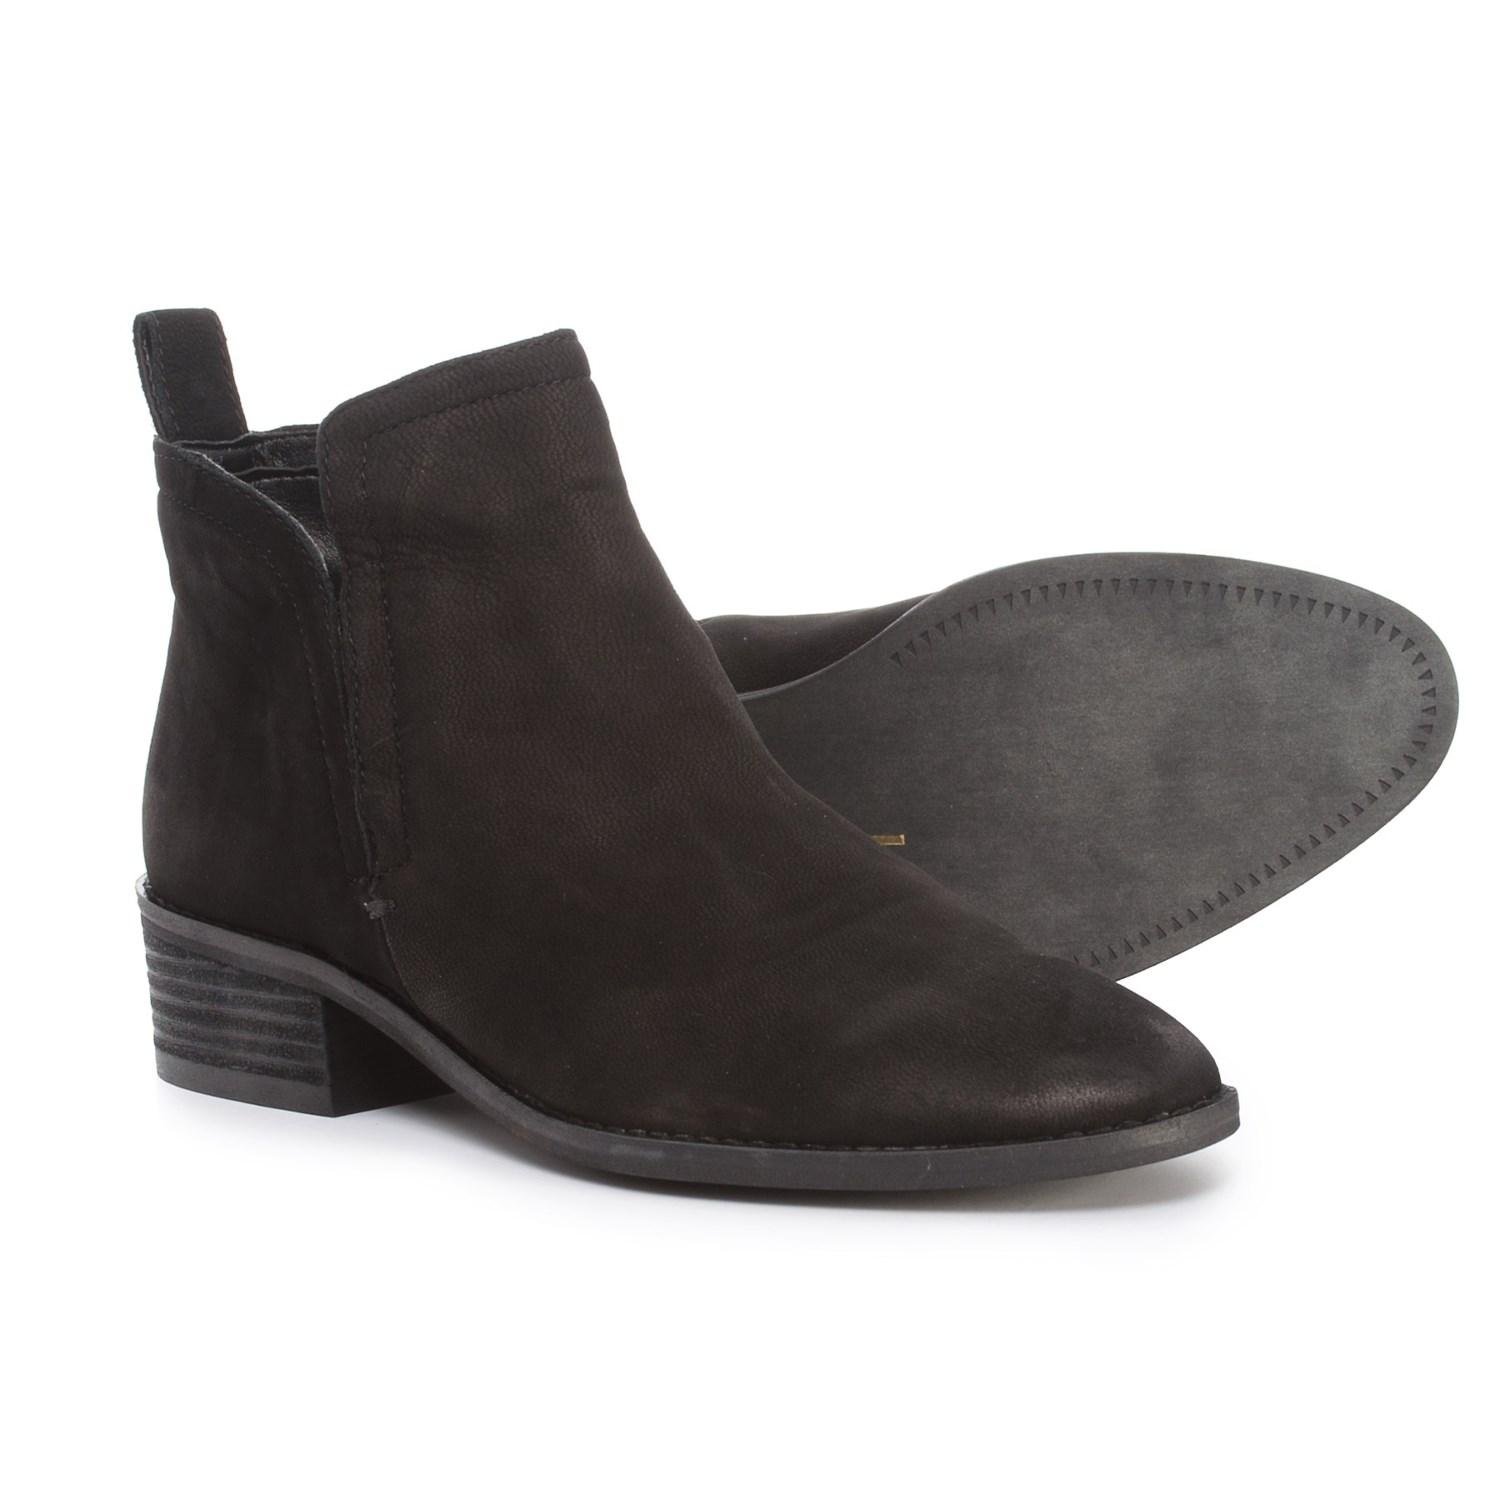 Dolce Vita Leather Tegan Ankle Boots in 